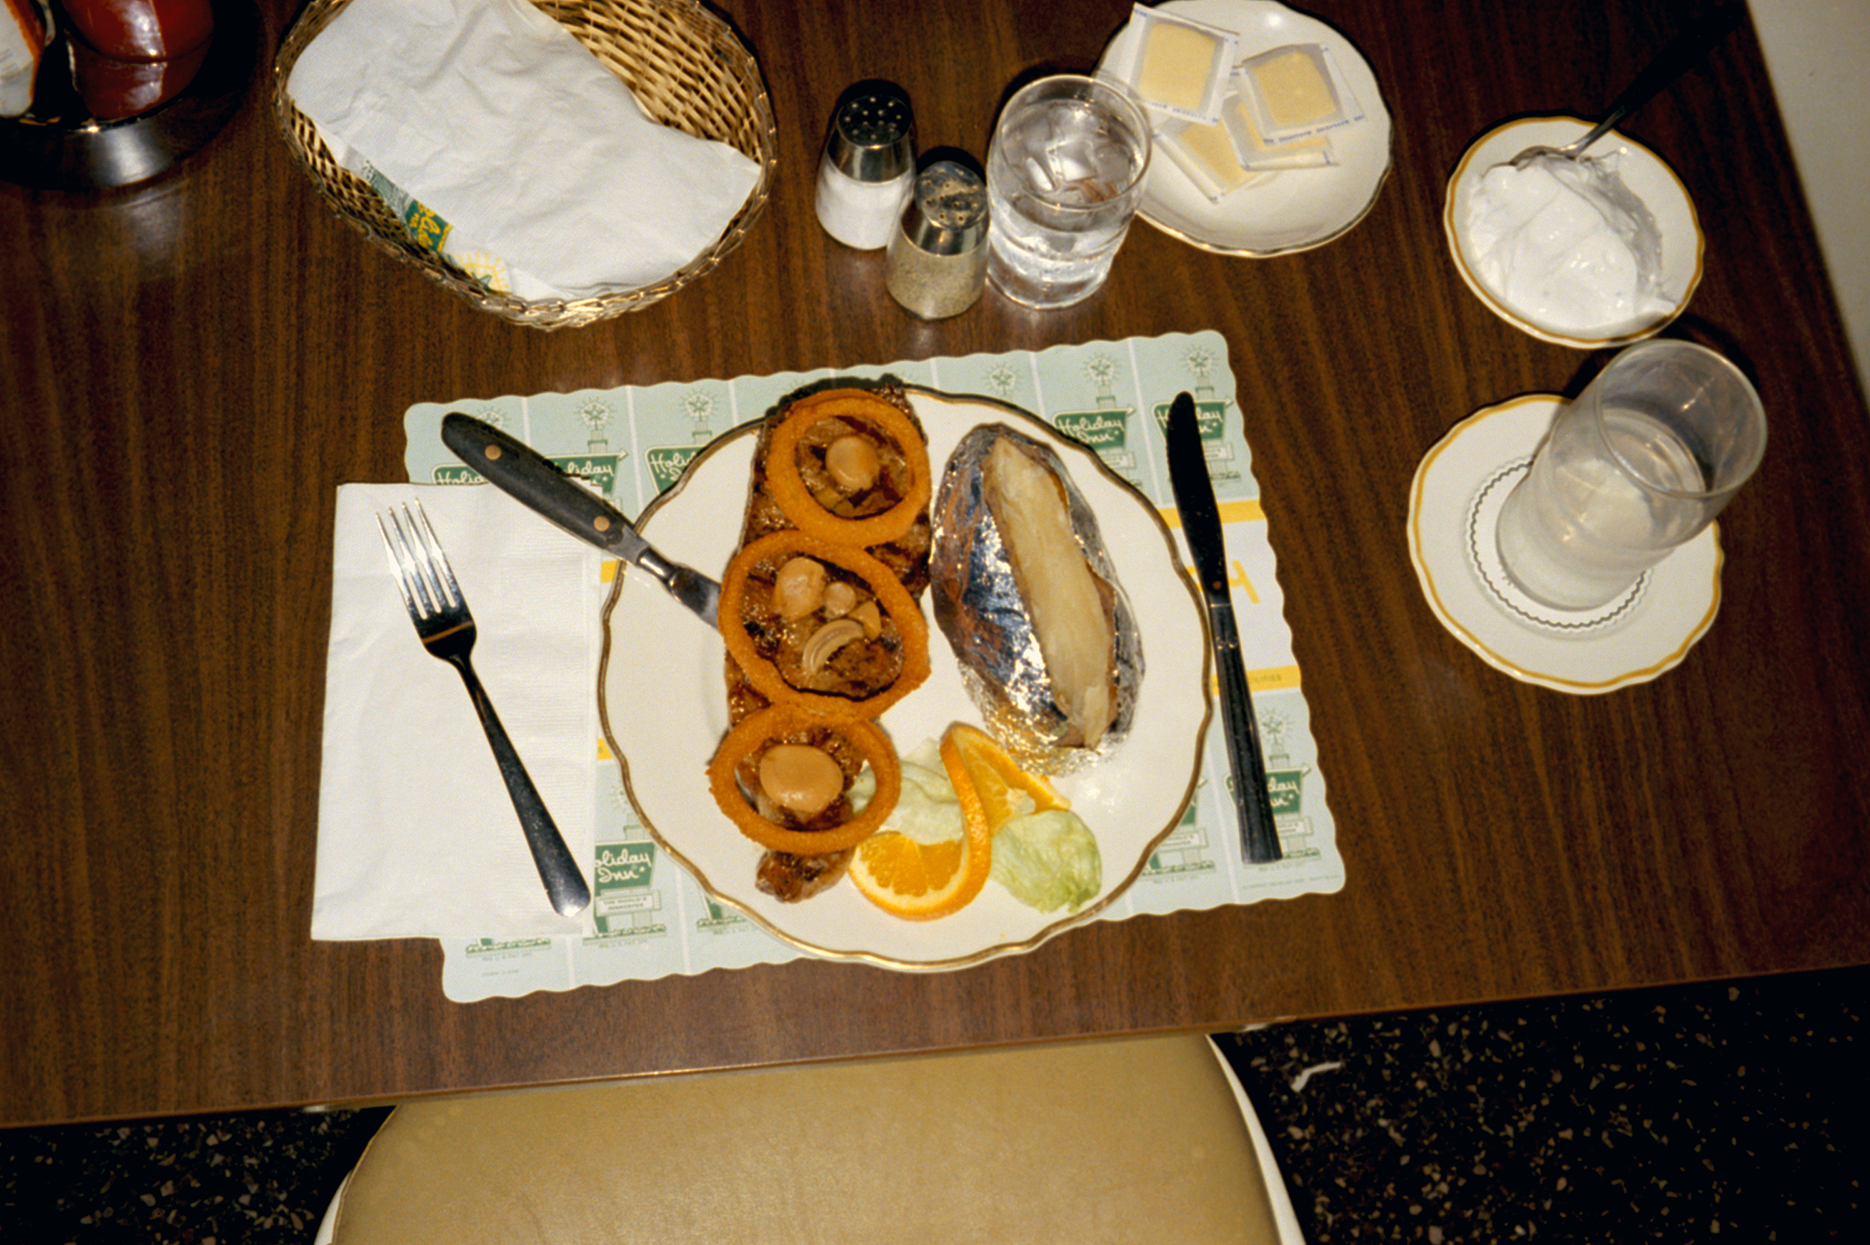 Color photograph showing a restaurant meal from above, including a paper placemat, basket of napkins, butter pats, and salt and pepper shakers